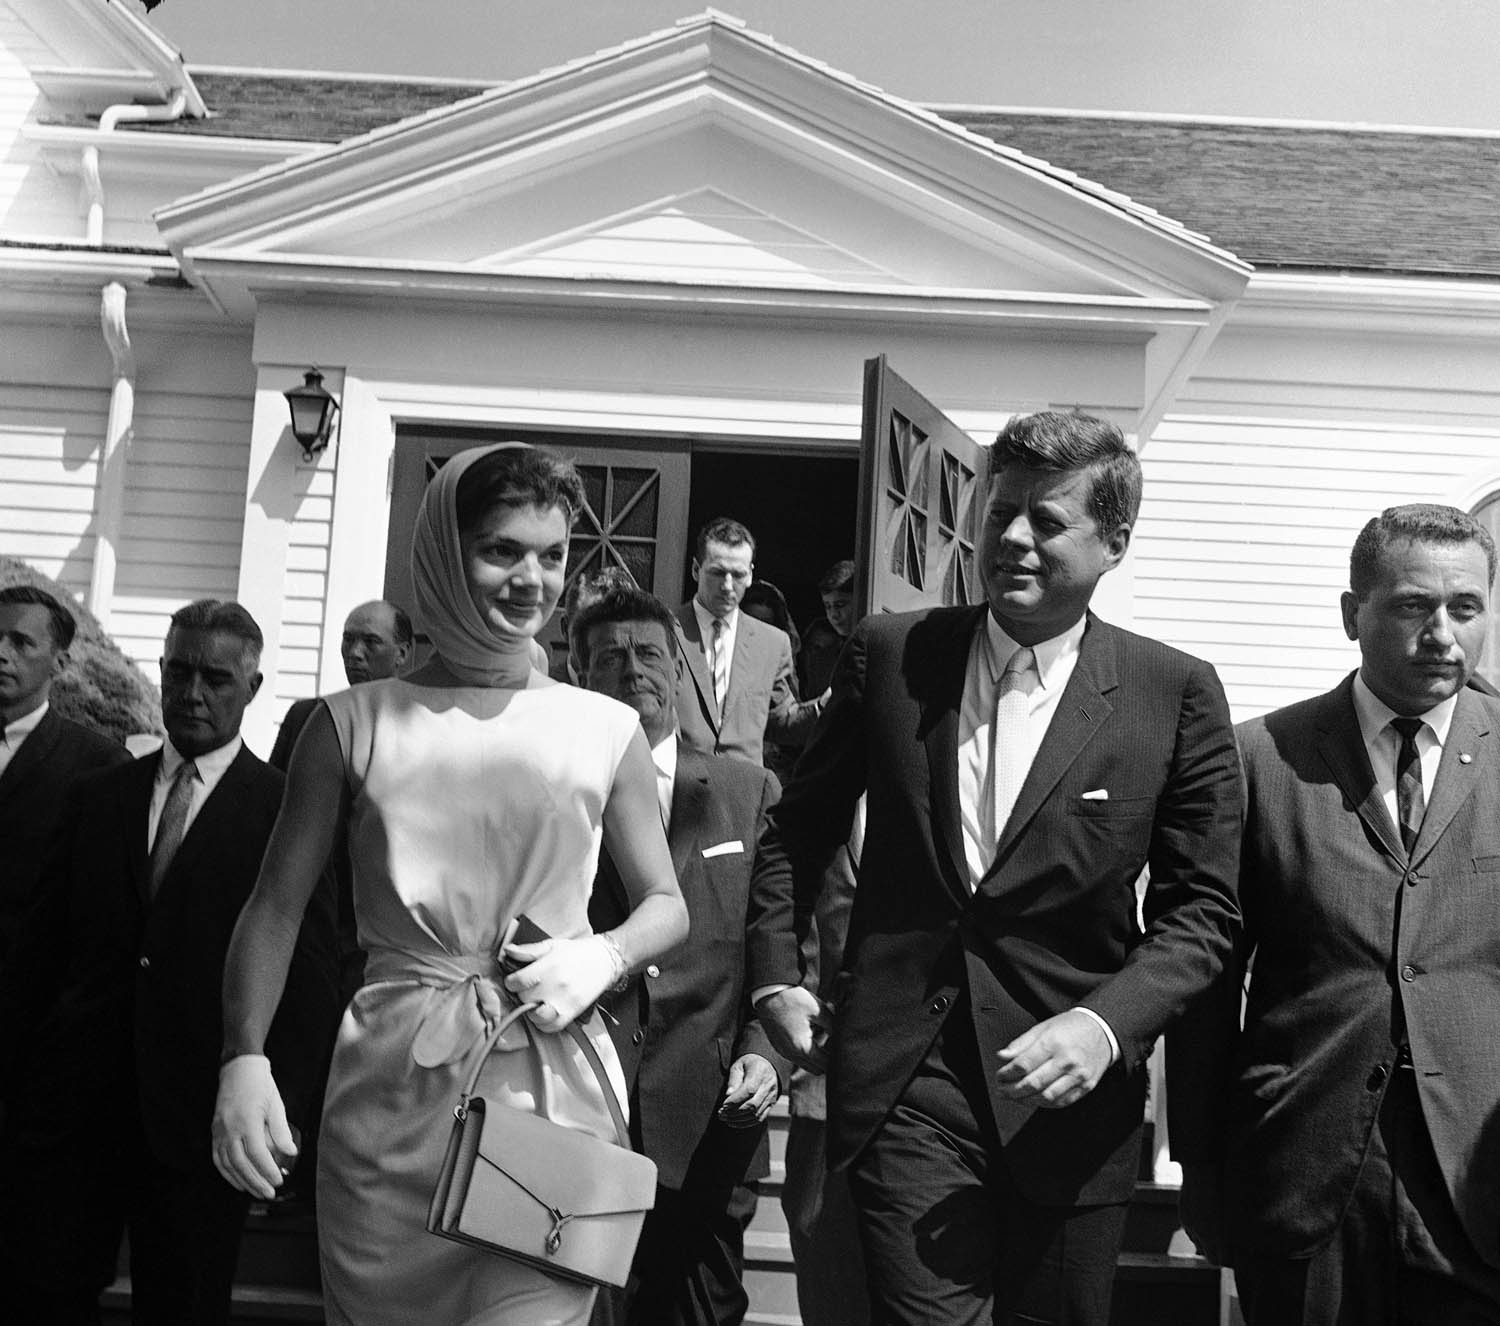 President John F. Kennedy and wife Jacqueline leave St. Francis church after attending mass at Hyannis Port, Mass., on July 23, 1961. (Frank C. Curtin/AP)